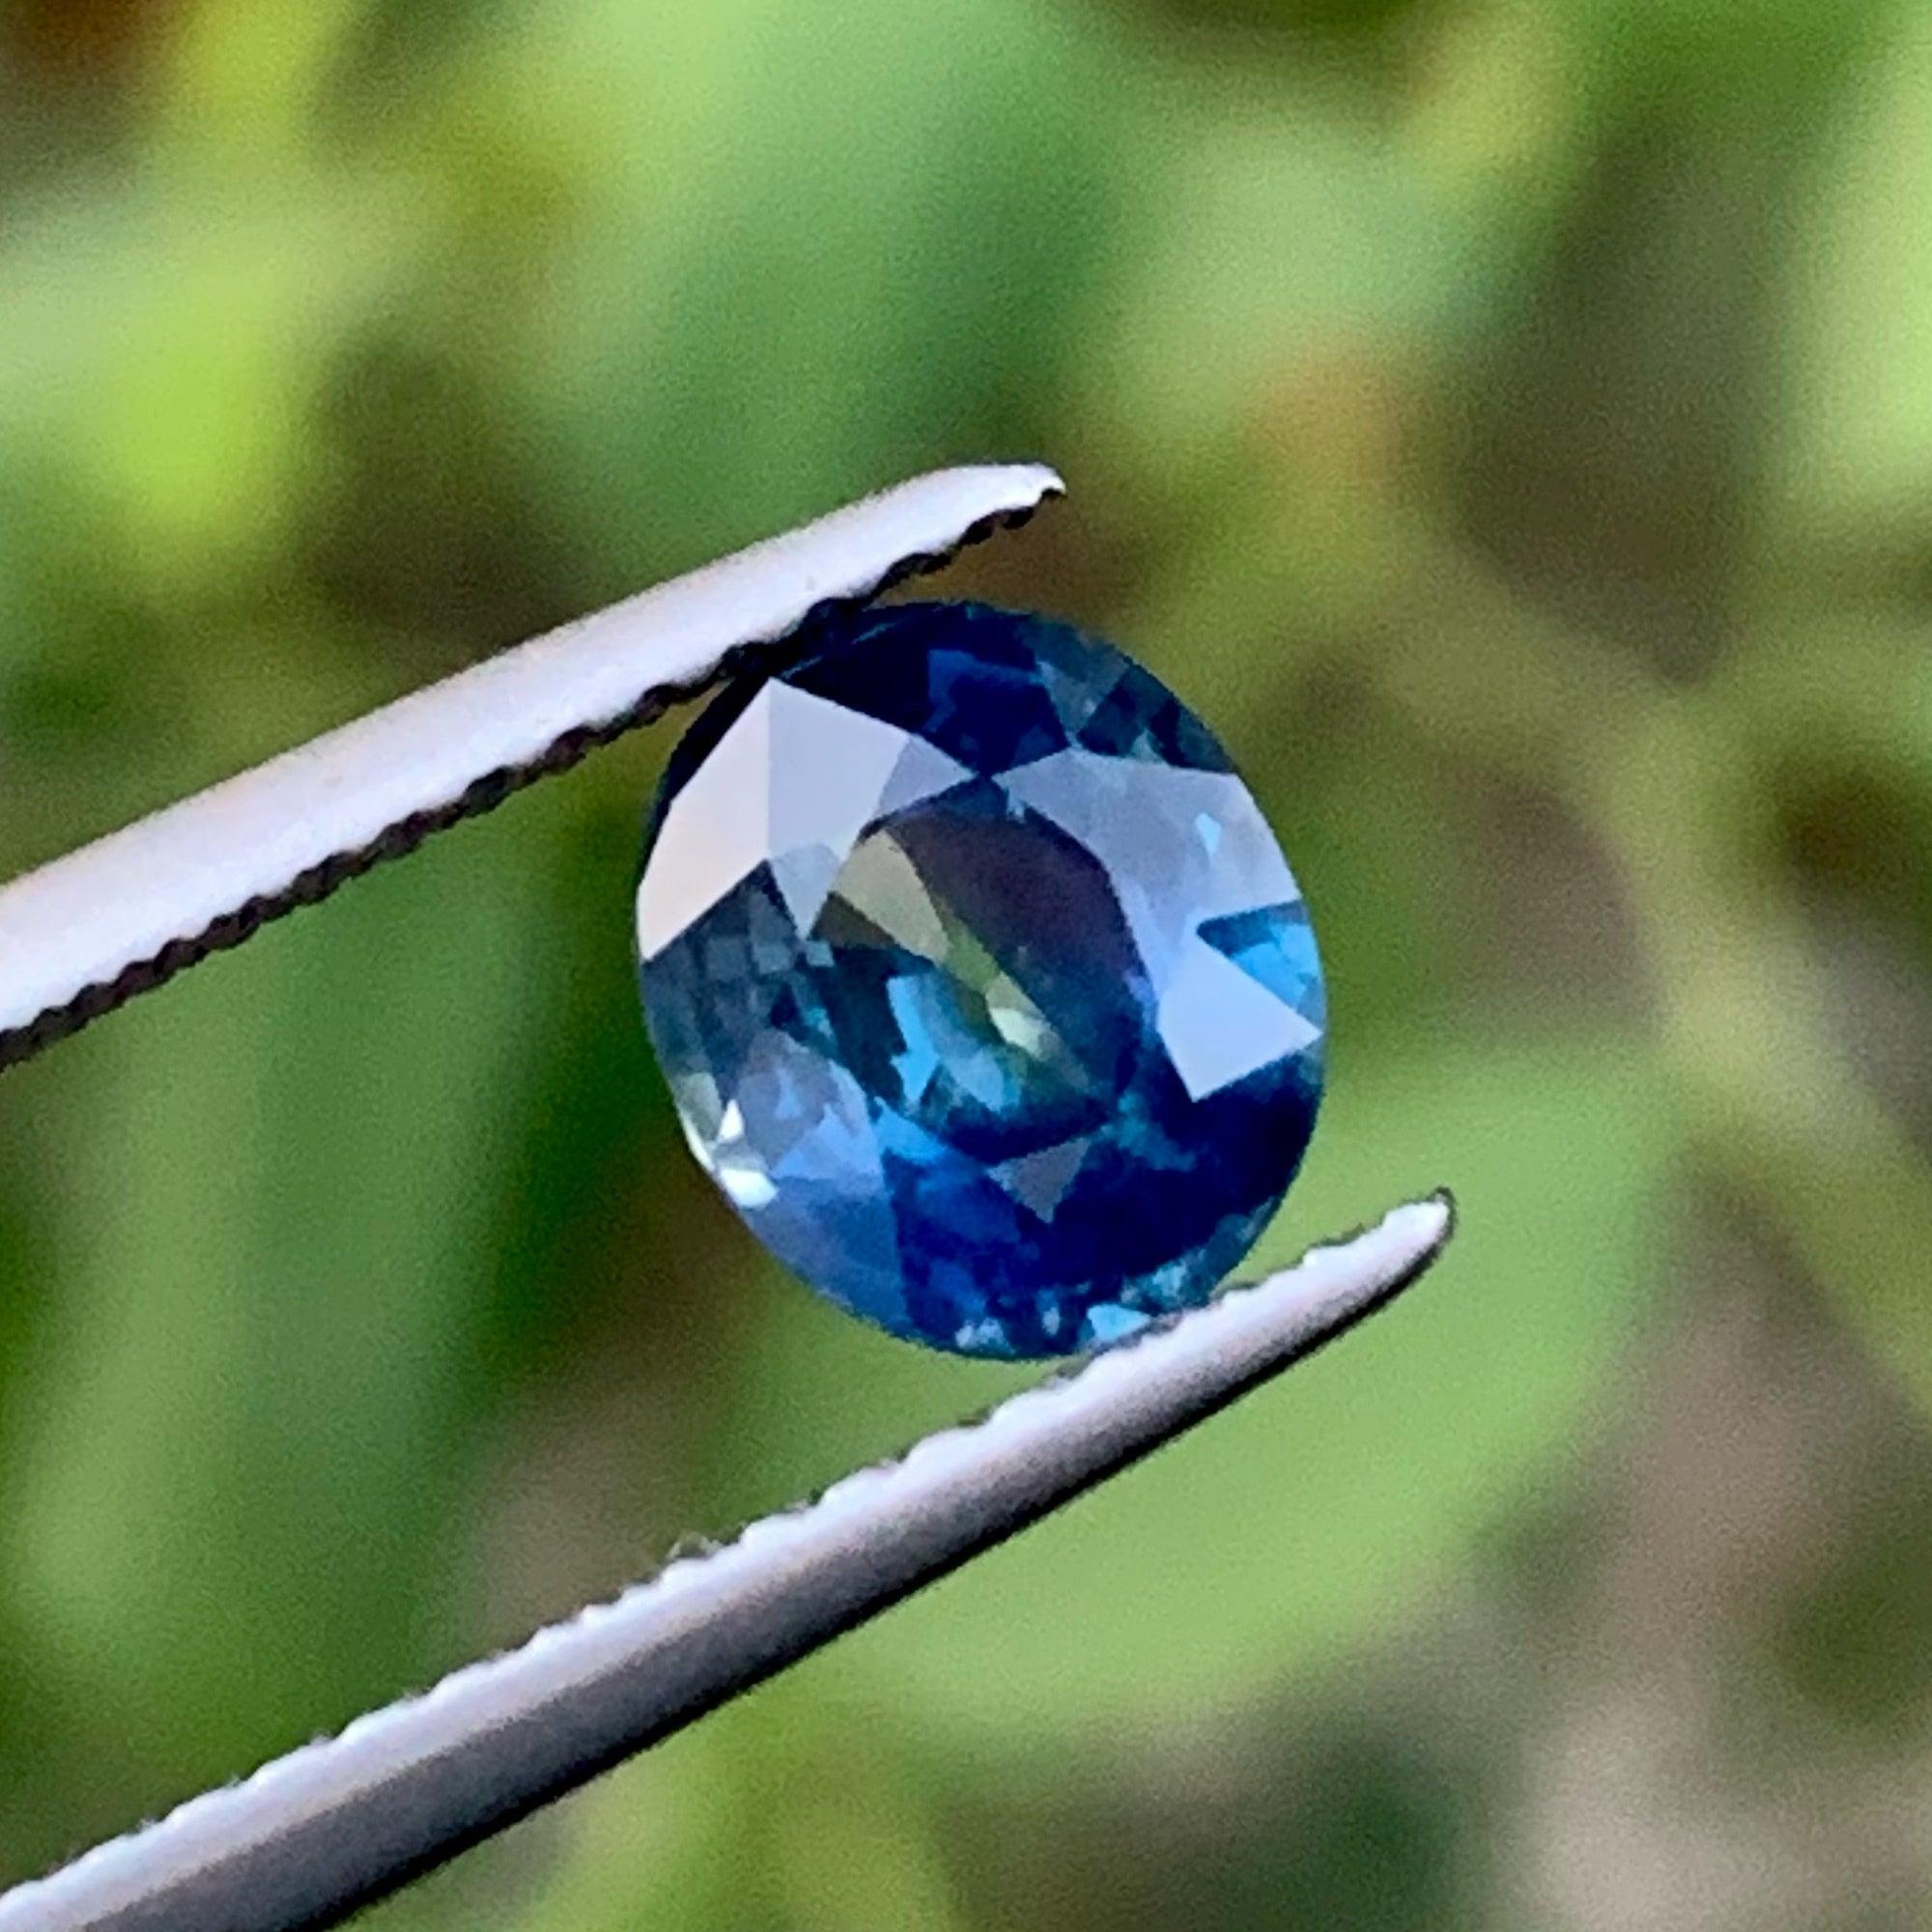 Natural Soft Blue Sapphire Gemstone of 1.46 carats from Madagascar has a wonderful cut in a Oval shape, incredible Blue color, Great brilliance. This gem is Eye Clean Clarity.

Product Information:
GEMSTONE TYPE:	Natural Soft Blue Sapphire